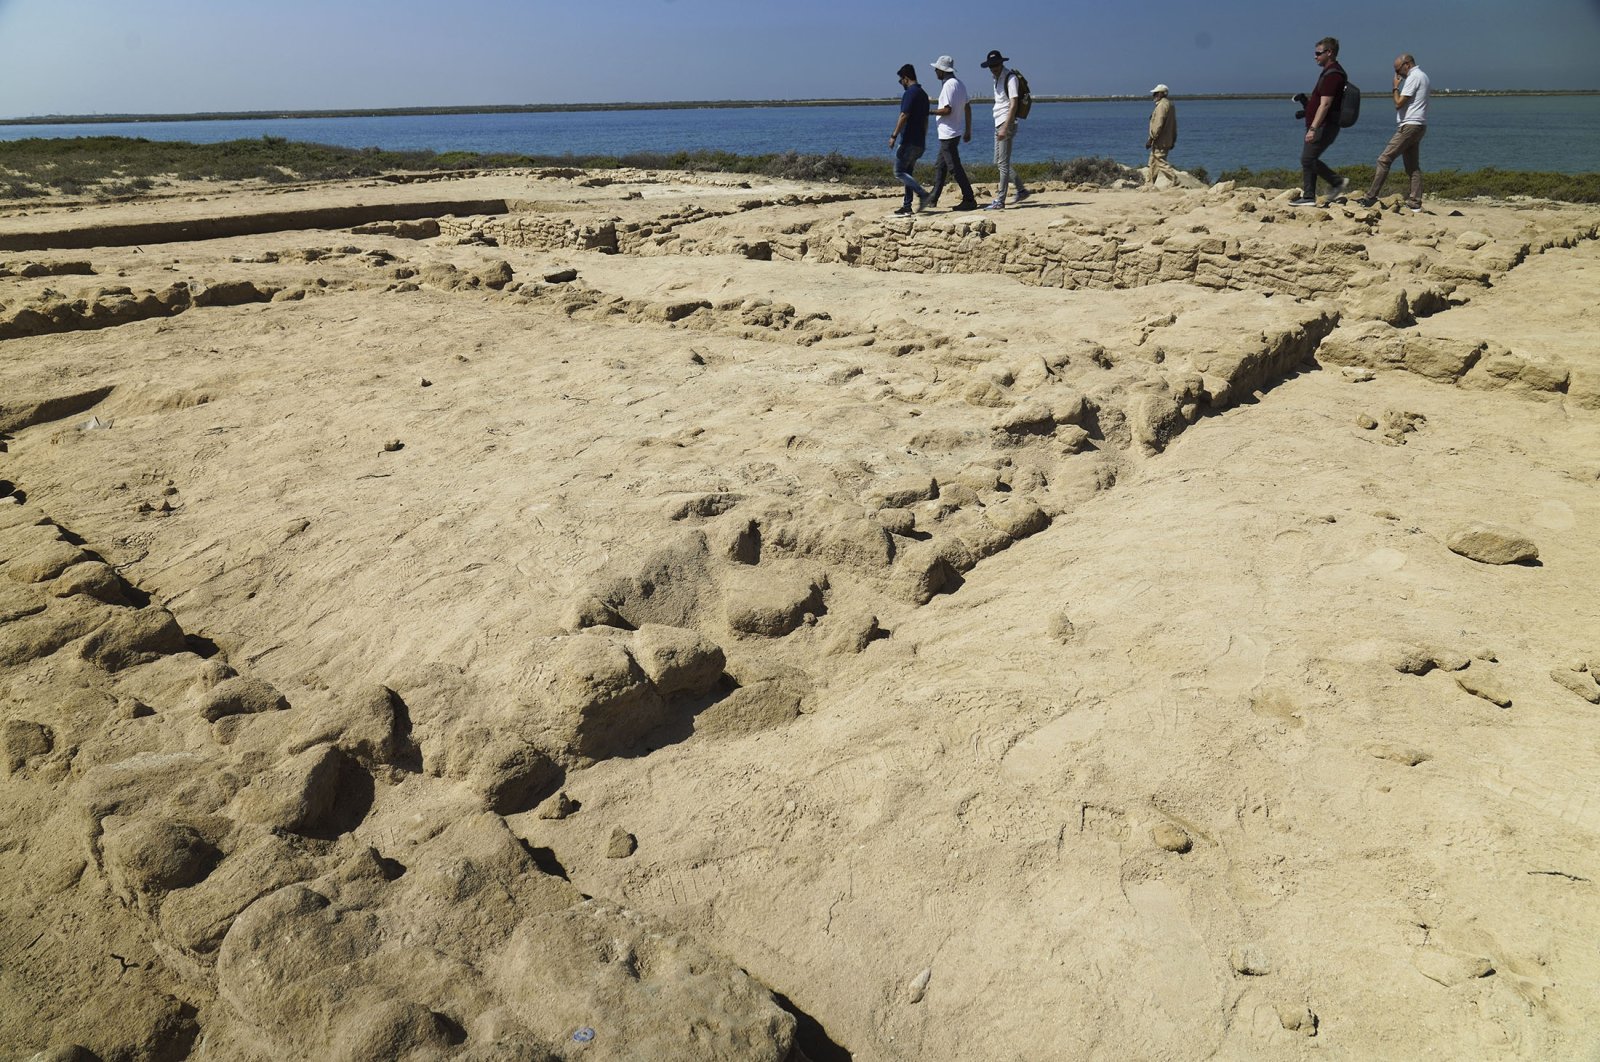 Archaeologists and journalists walk past uncovered ruins on Siniyah Island in Umm al-Quwain, United Arab Emirates, March 20, 2023. (AP Photo)